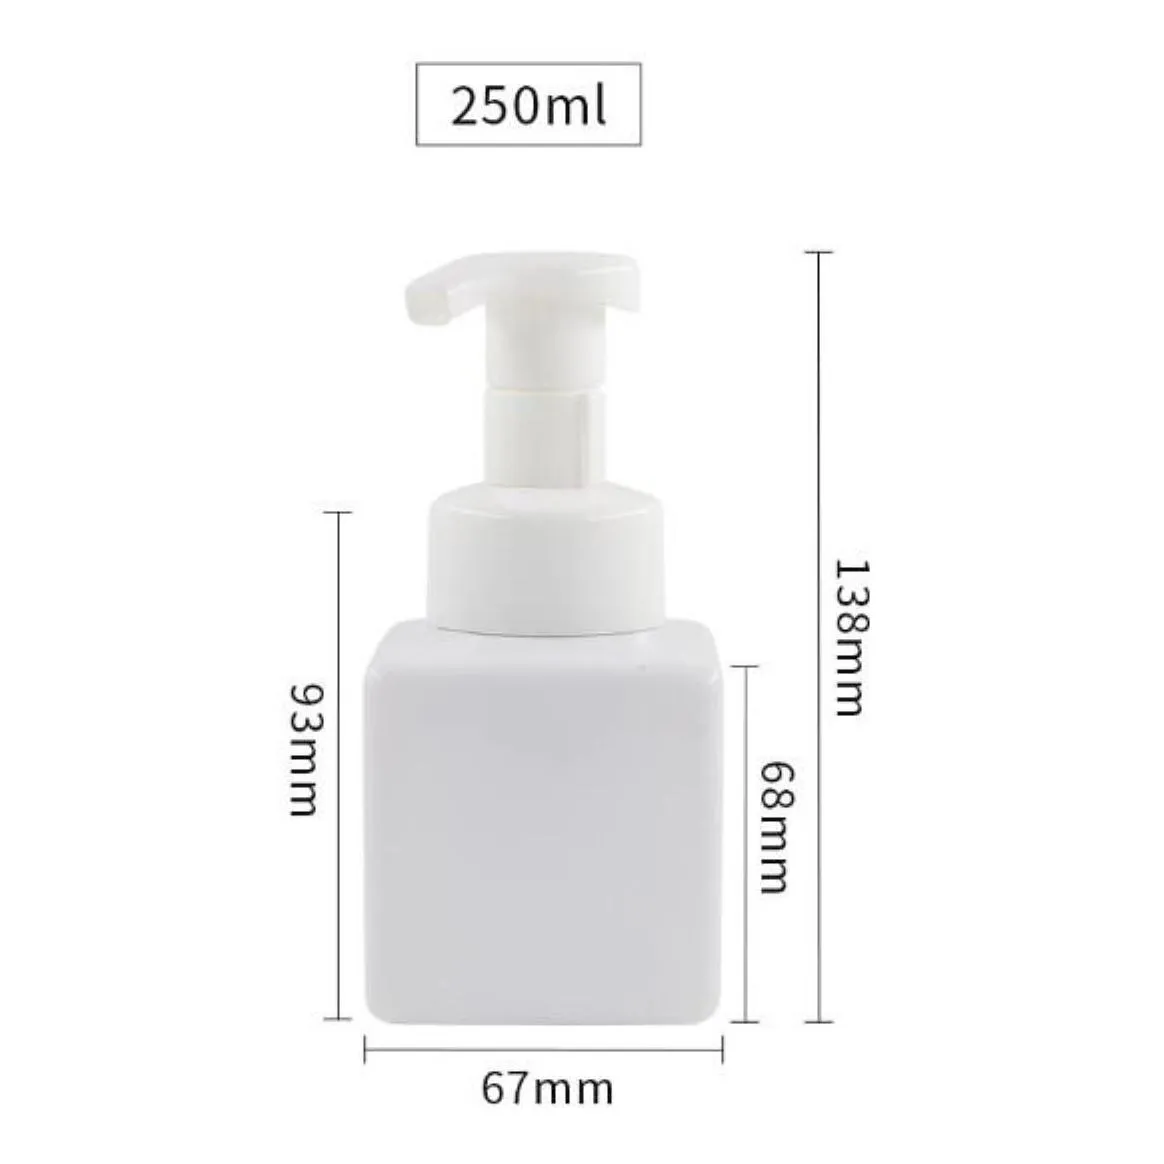 wholesale packing bottles office school business industrial 250ml pet plastic hand sanitizer bottle square foam pump for face cleansing fast sea